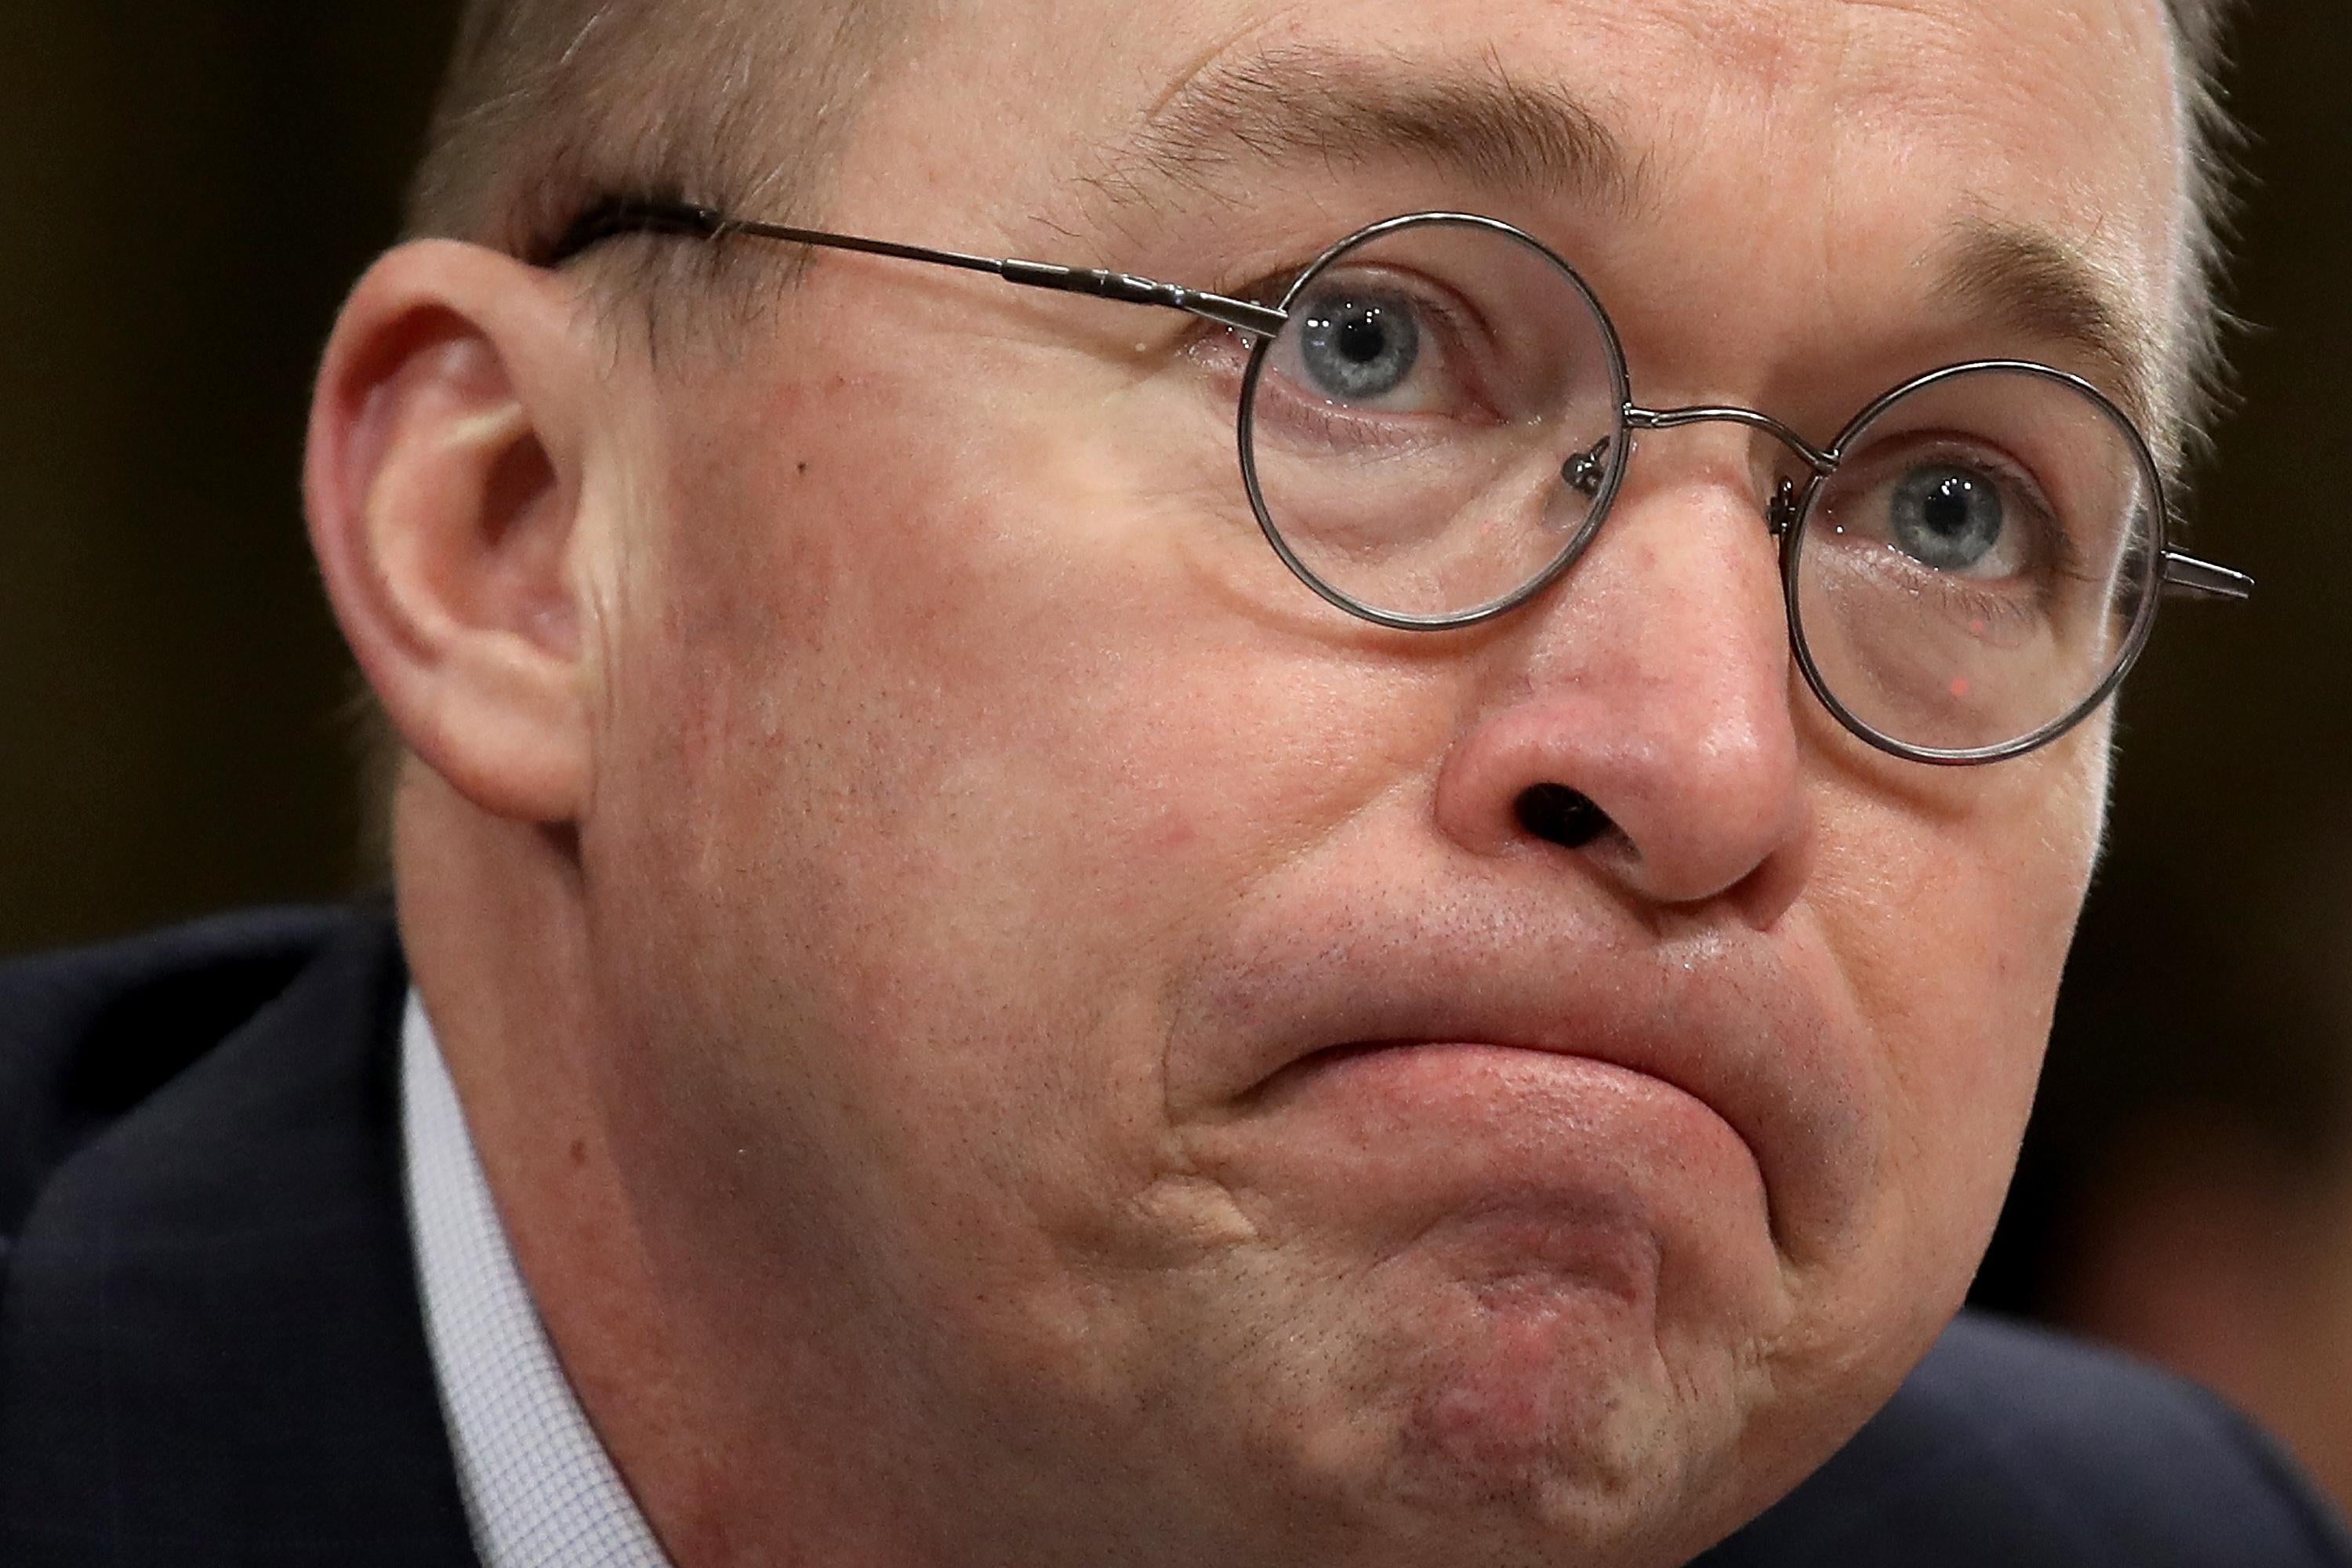 WASHINGTON, DC - FEBRUARY 13:  Office of Management and Budget Director Mick Mulvaney testifies before the Senate Budget Committee February 13, 2018 in Washington, DC. Mulvaney testified on U.S. President Donald Trump's fiscal year 2019 budget proposal that was released yesterday. (Photo by Win McNamee/Getty Images)